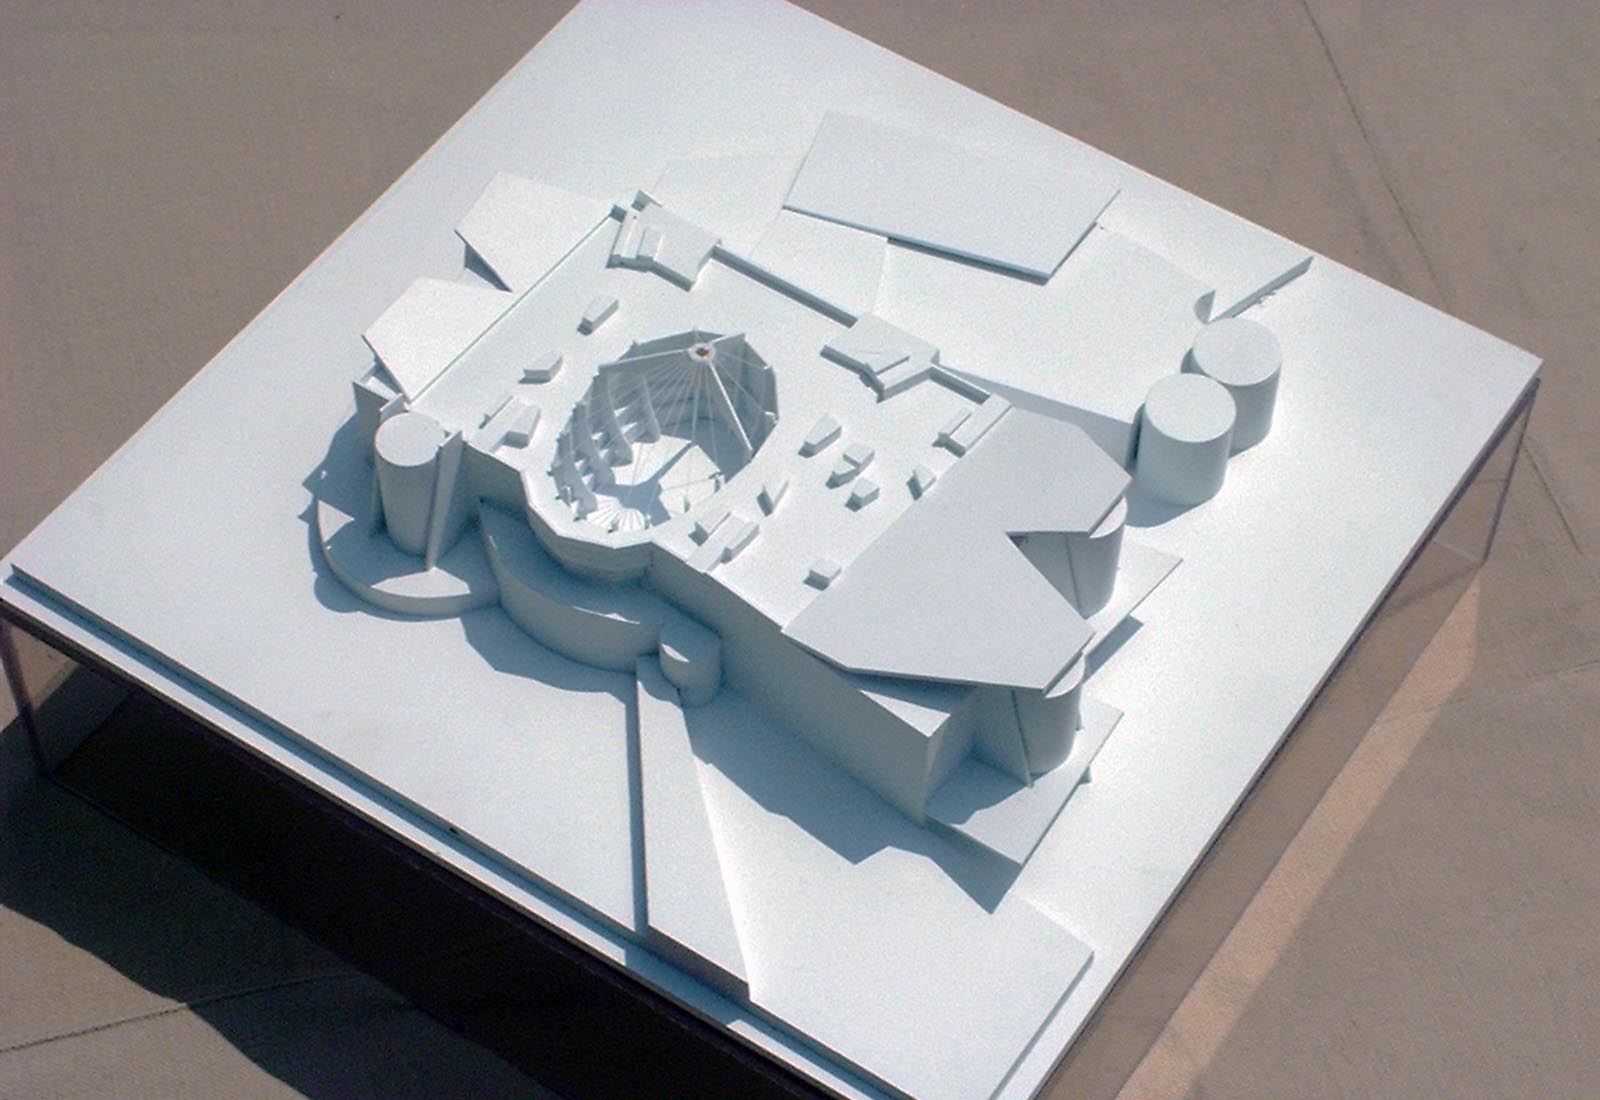 Leisure center in Rho - View of the model